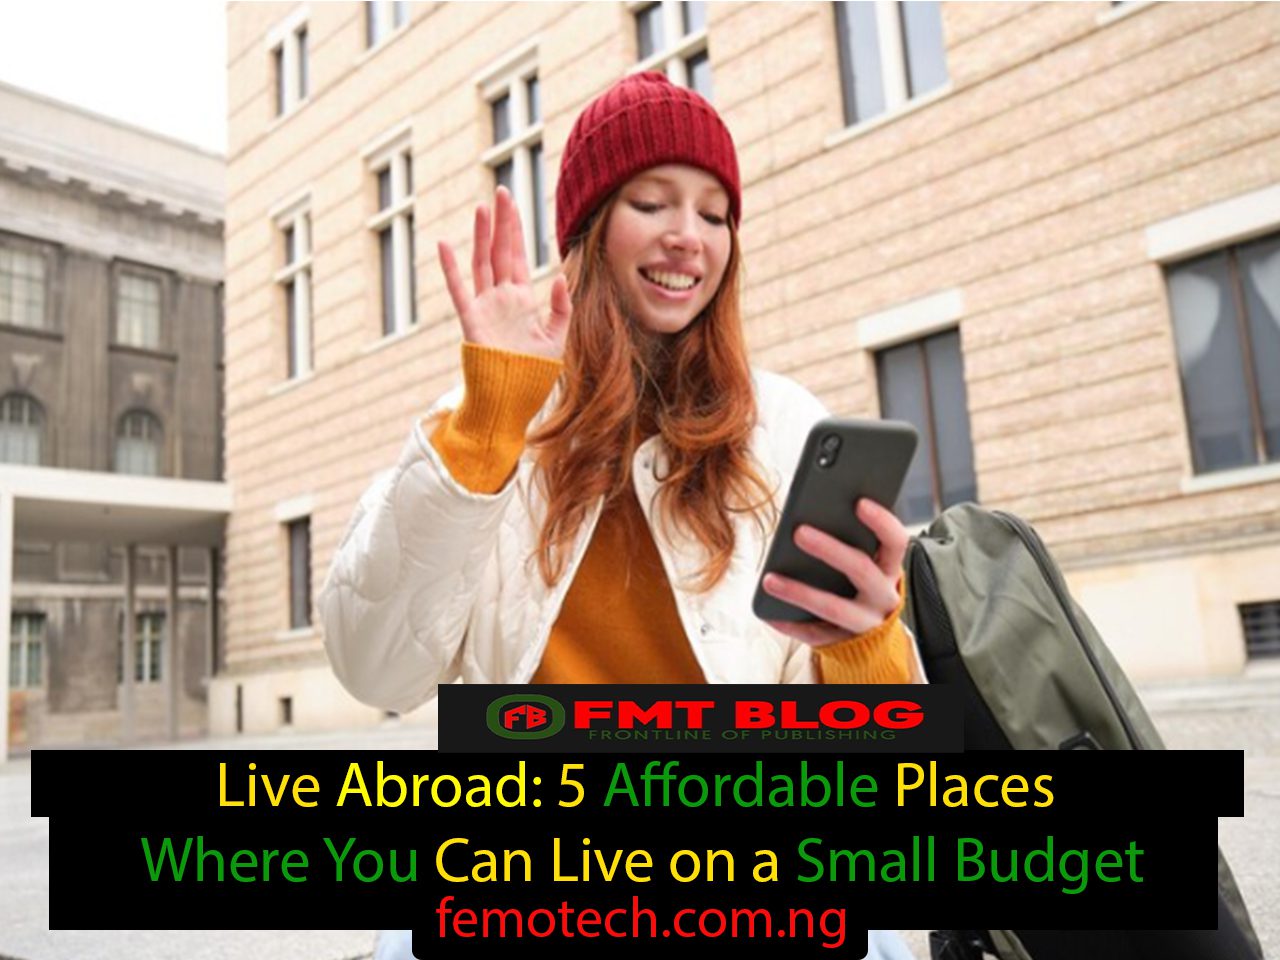 Live Abroad: 5 Affordable Places Where You Can Live on a Small Budget